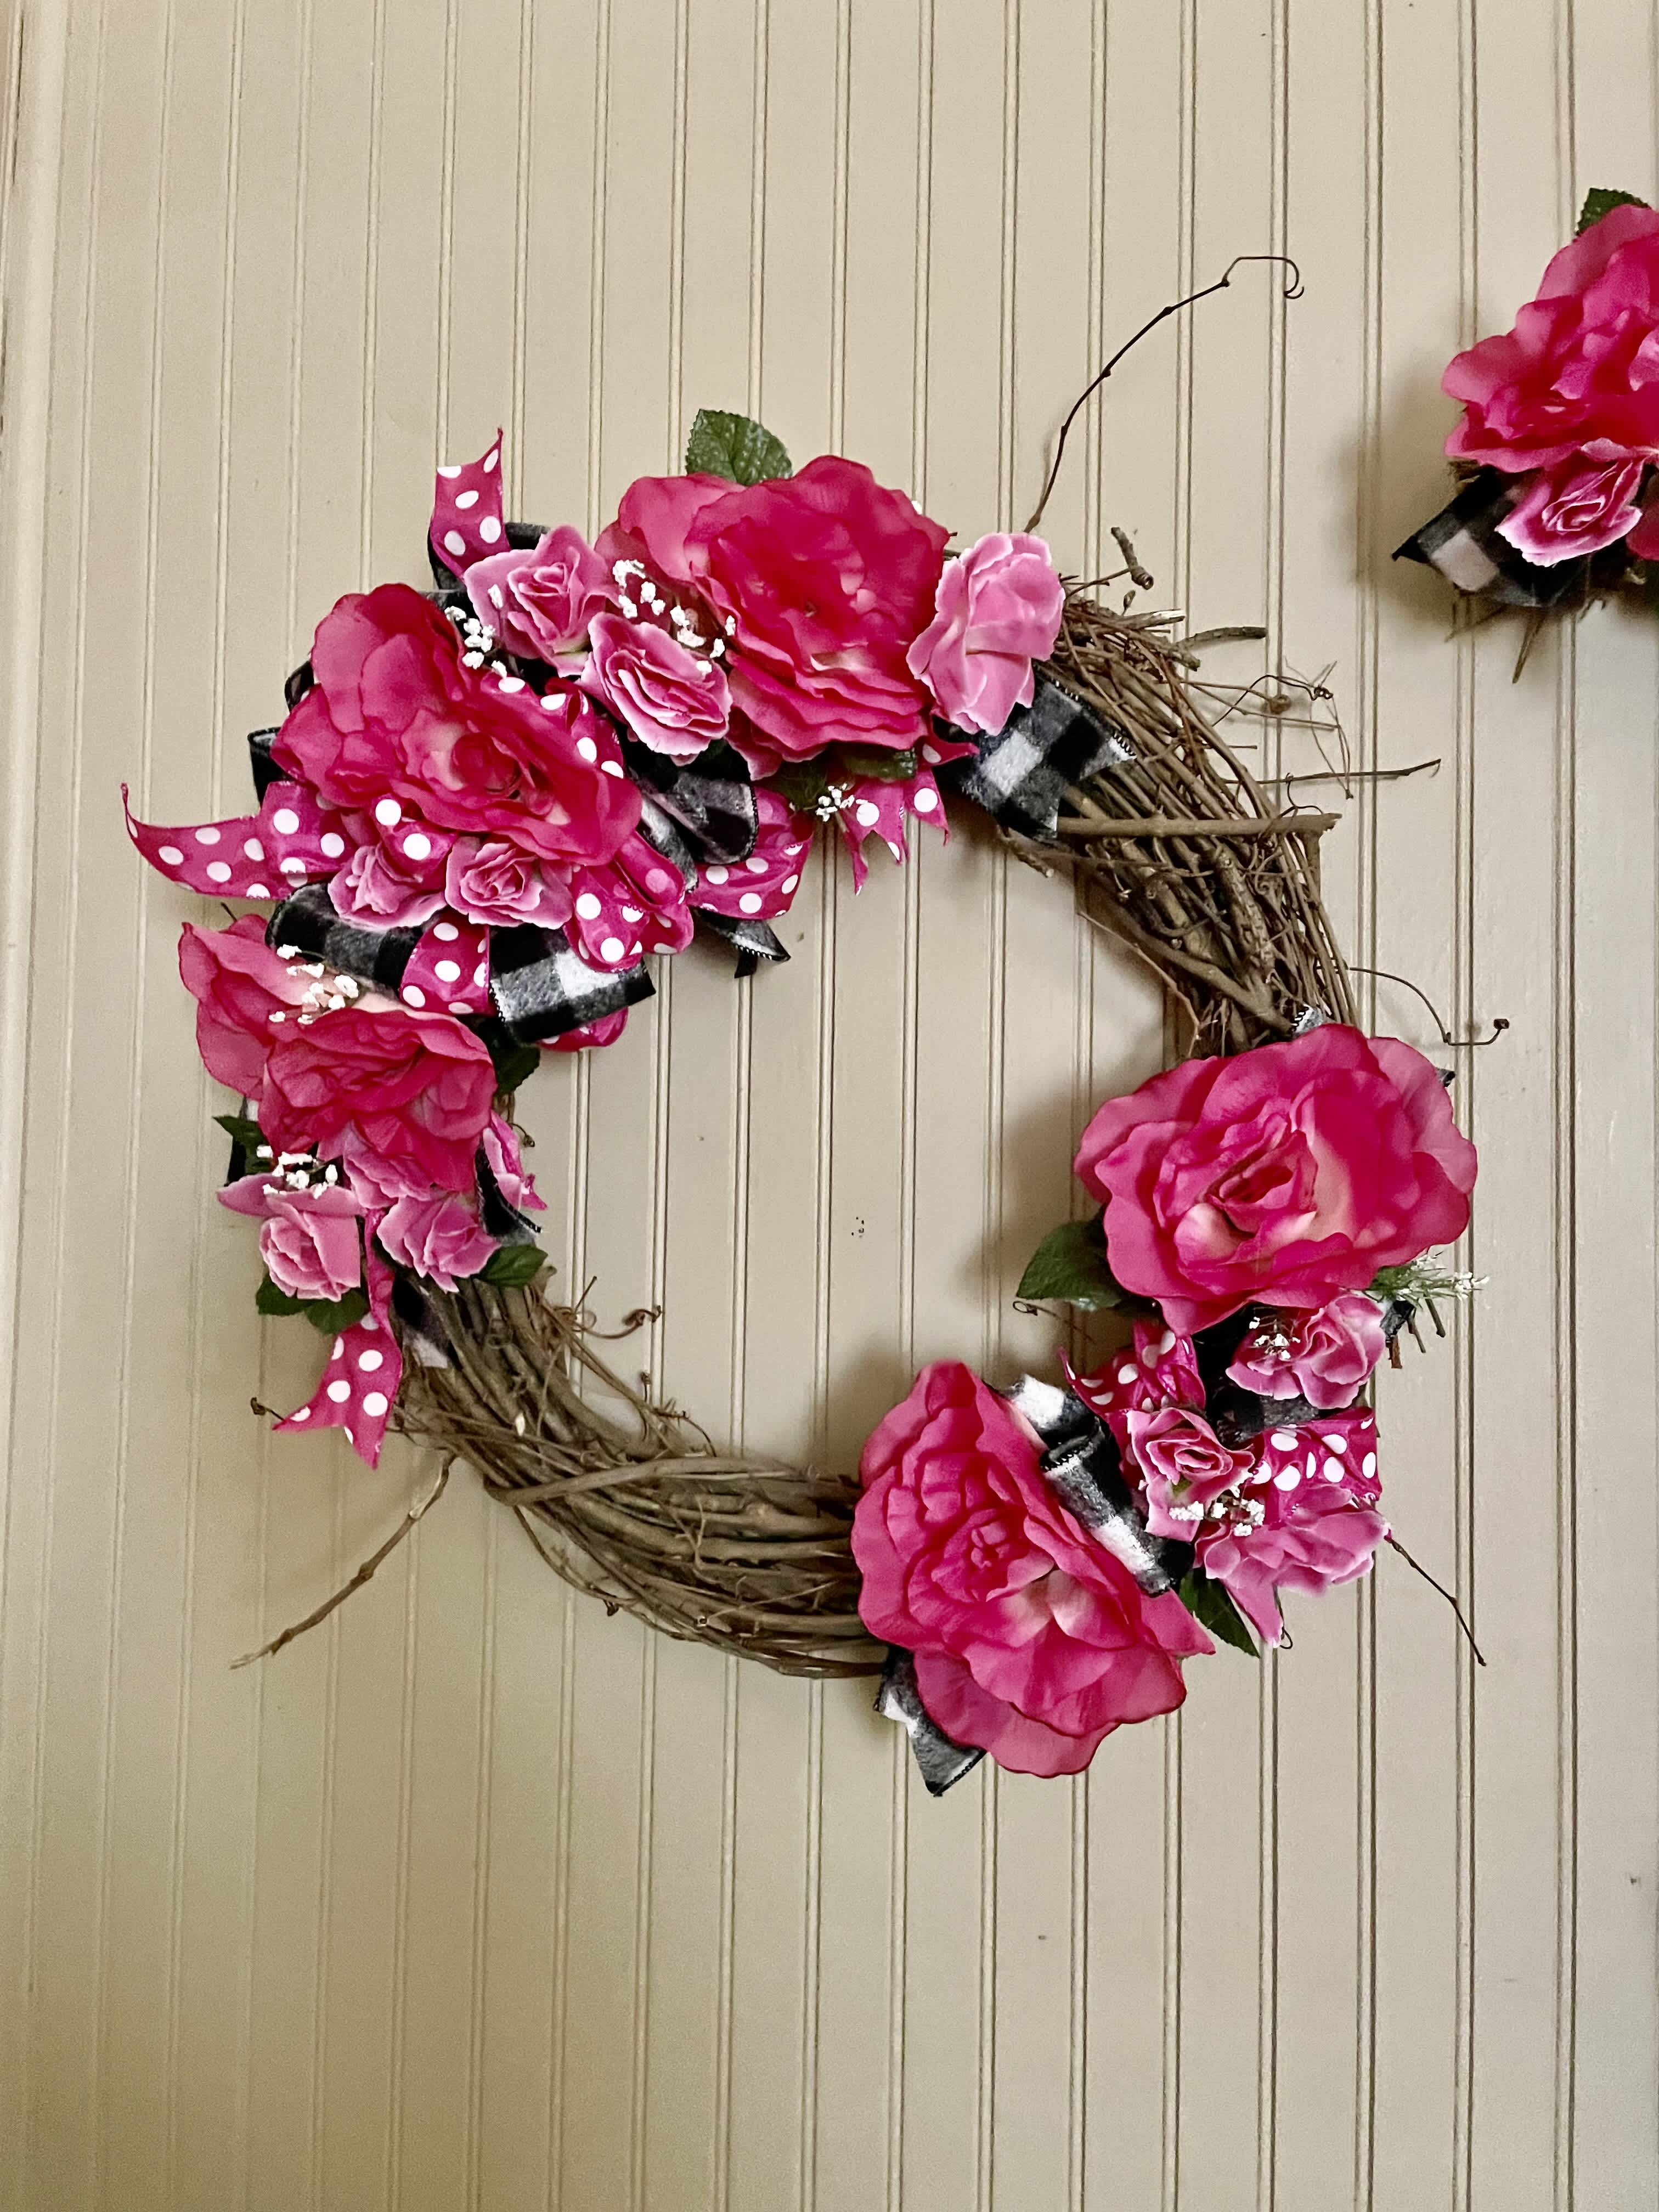 Pretty Pink and Plaid Silk Grapevine wreath  - Beautifully arranged roses in shades of pink and mixed greenery make this Grapevine Wreath an absolute beauty. Unique and lovely.